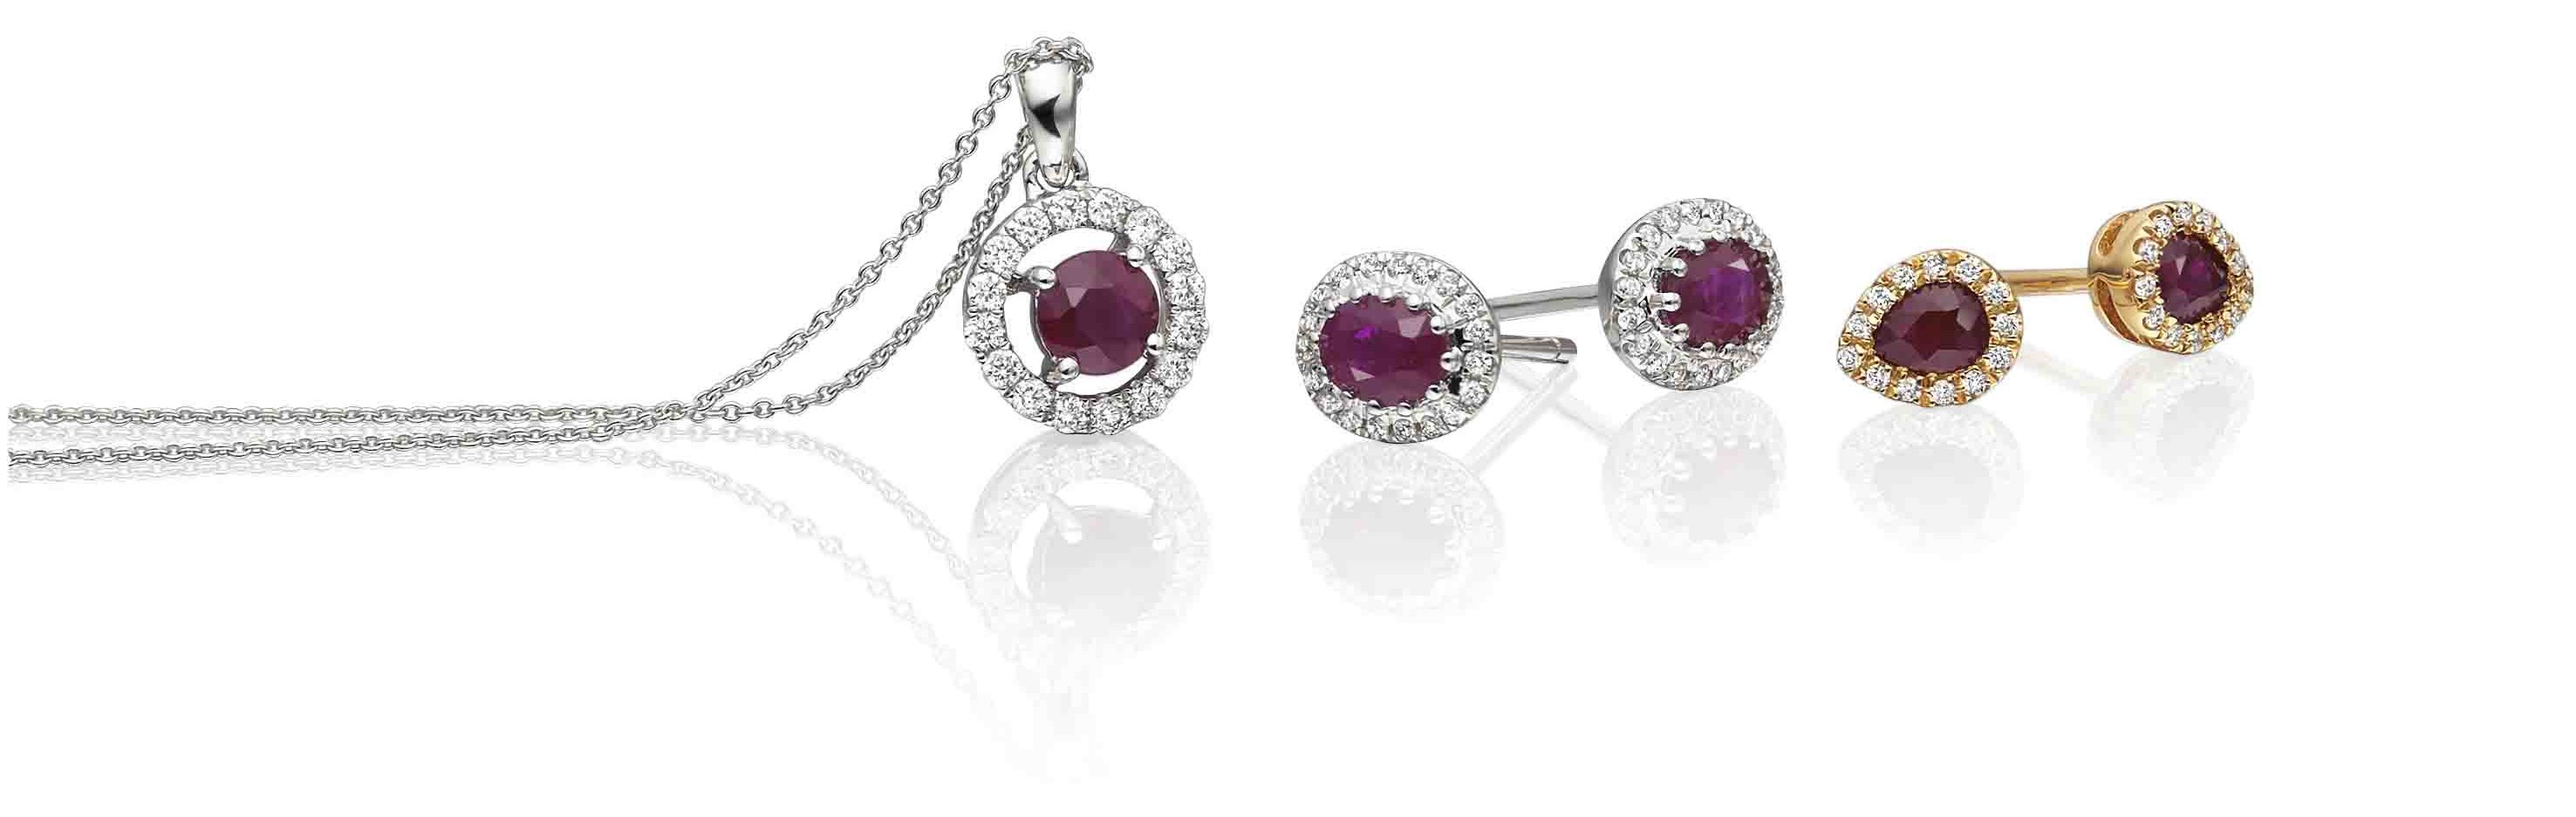 Ruby necklace and ruby earrings set on gold